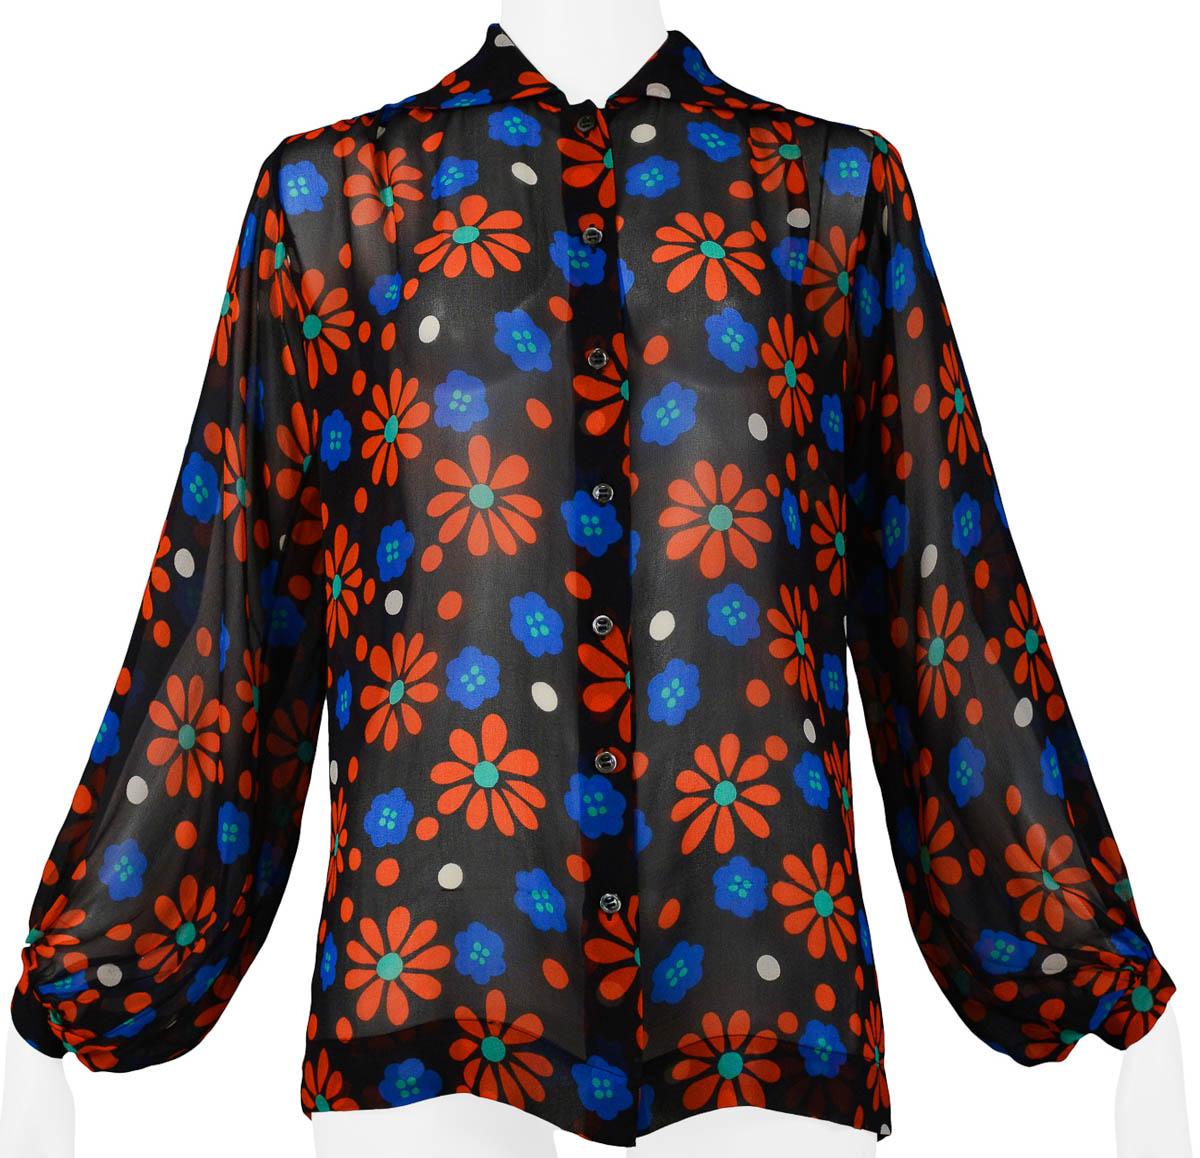 Vintage Yves Saint Laurent red & blue silk floral and white dot print blouse featuring a round neck with spread collar and long sleeves with button cuffs.

Excellent Condition.

Size: 38 